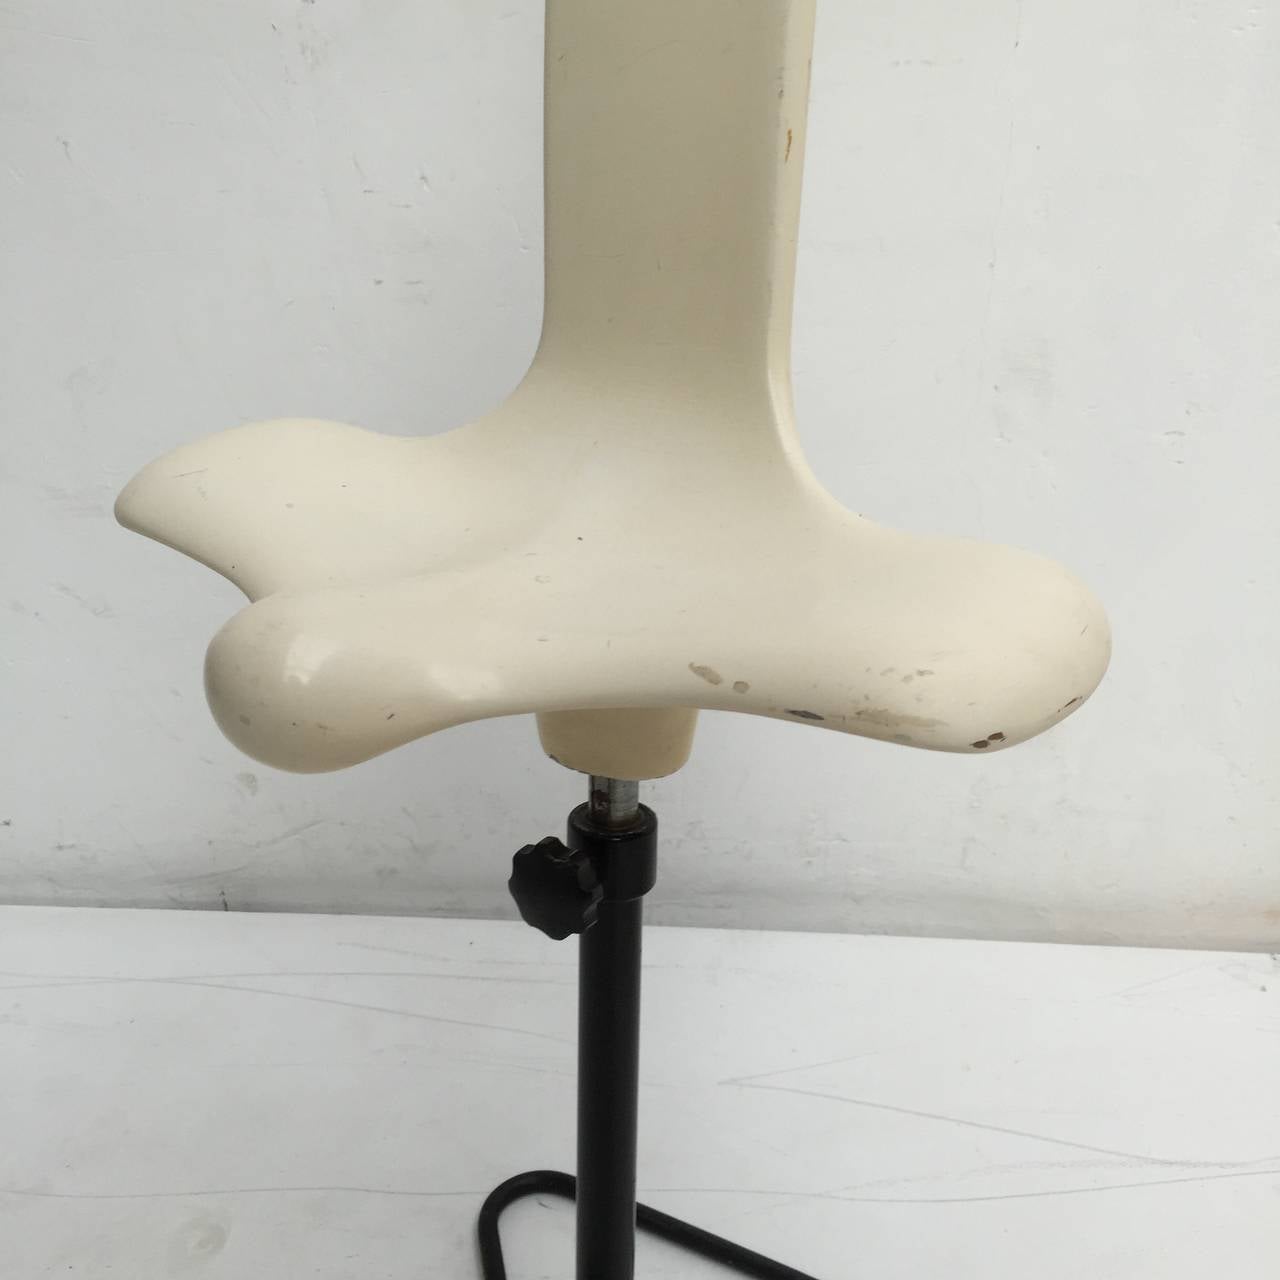 Wonderful, adjustable height,  'appoggio'  drafting stool by italian architect and designer Claudio Salocchi (1934-2012) for Sormani, 1971. The  exquisite sculptural form  moulded from laquered fibreglass refers back to the biomorphic forms created